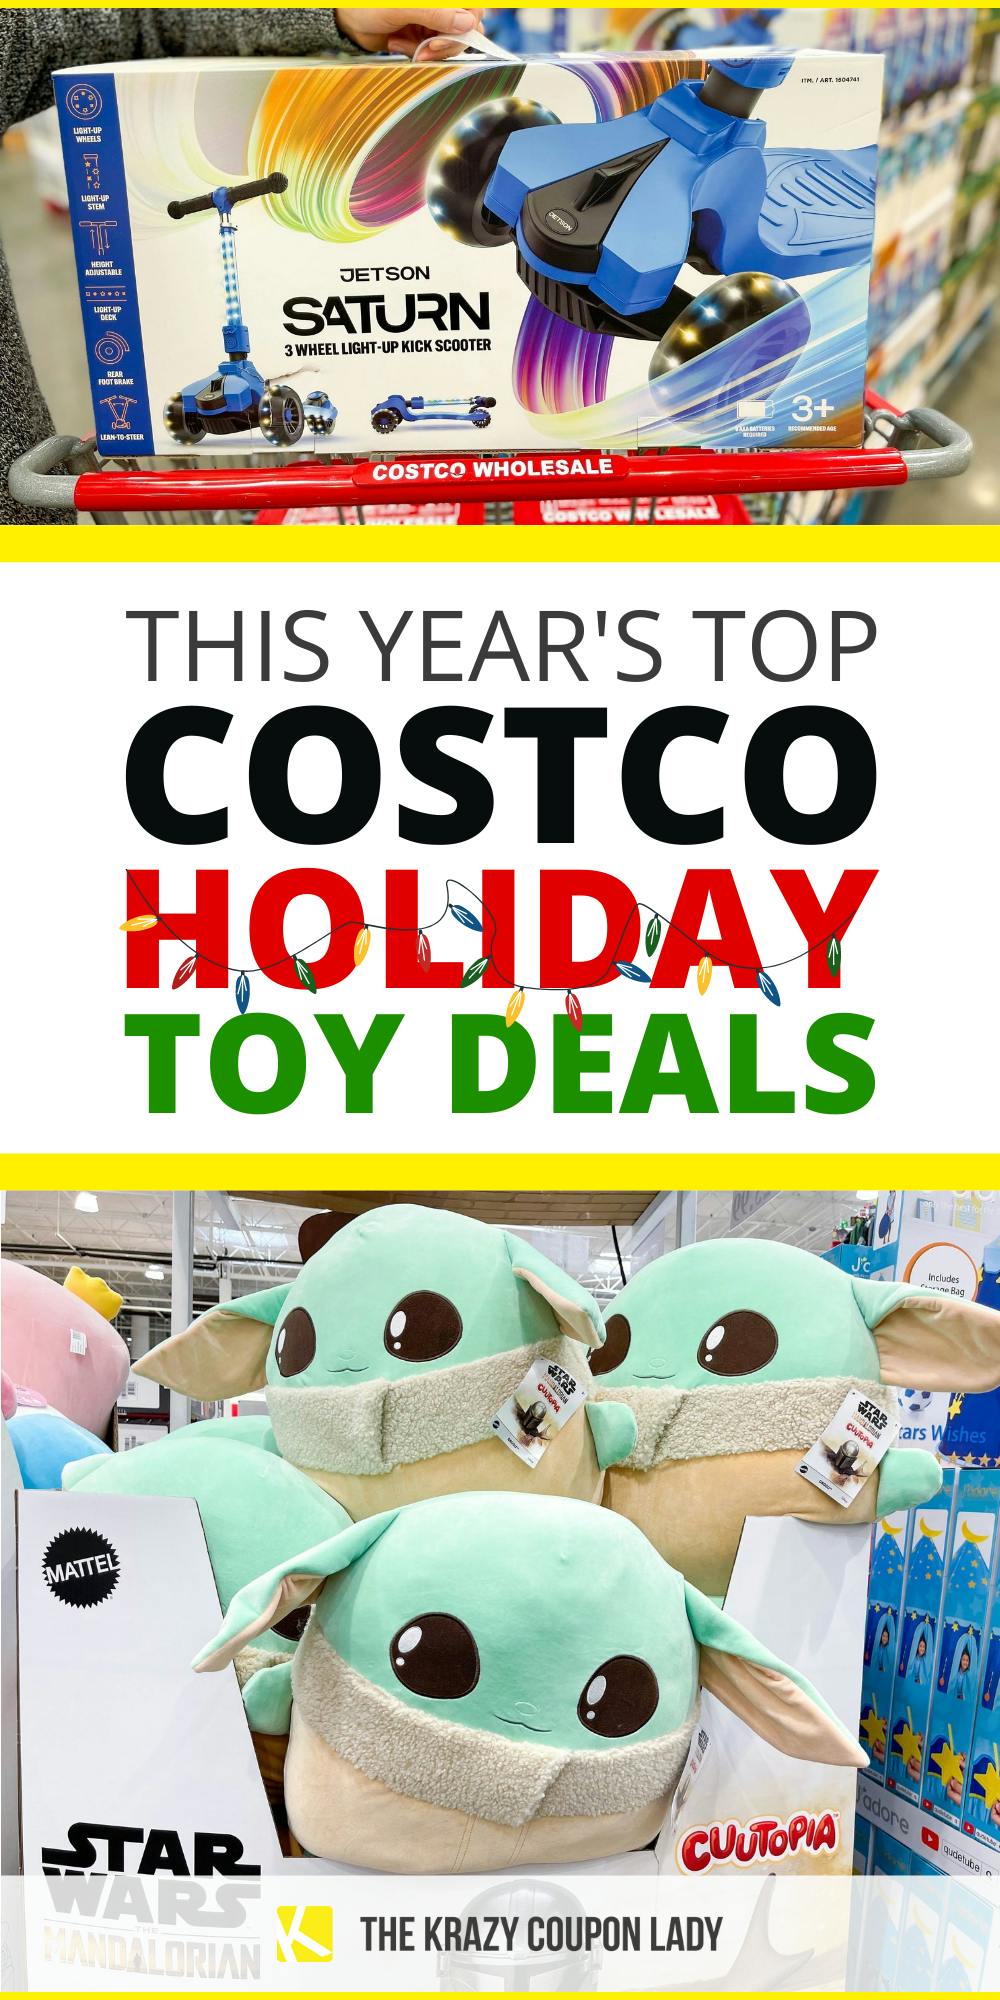 Costco Holiday Toy Deals for 2022